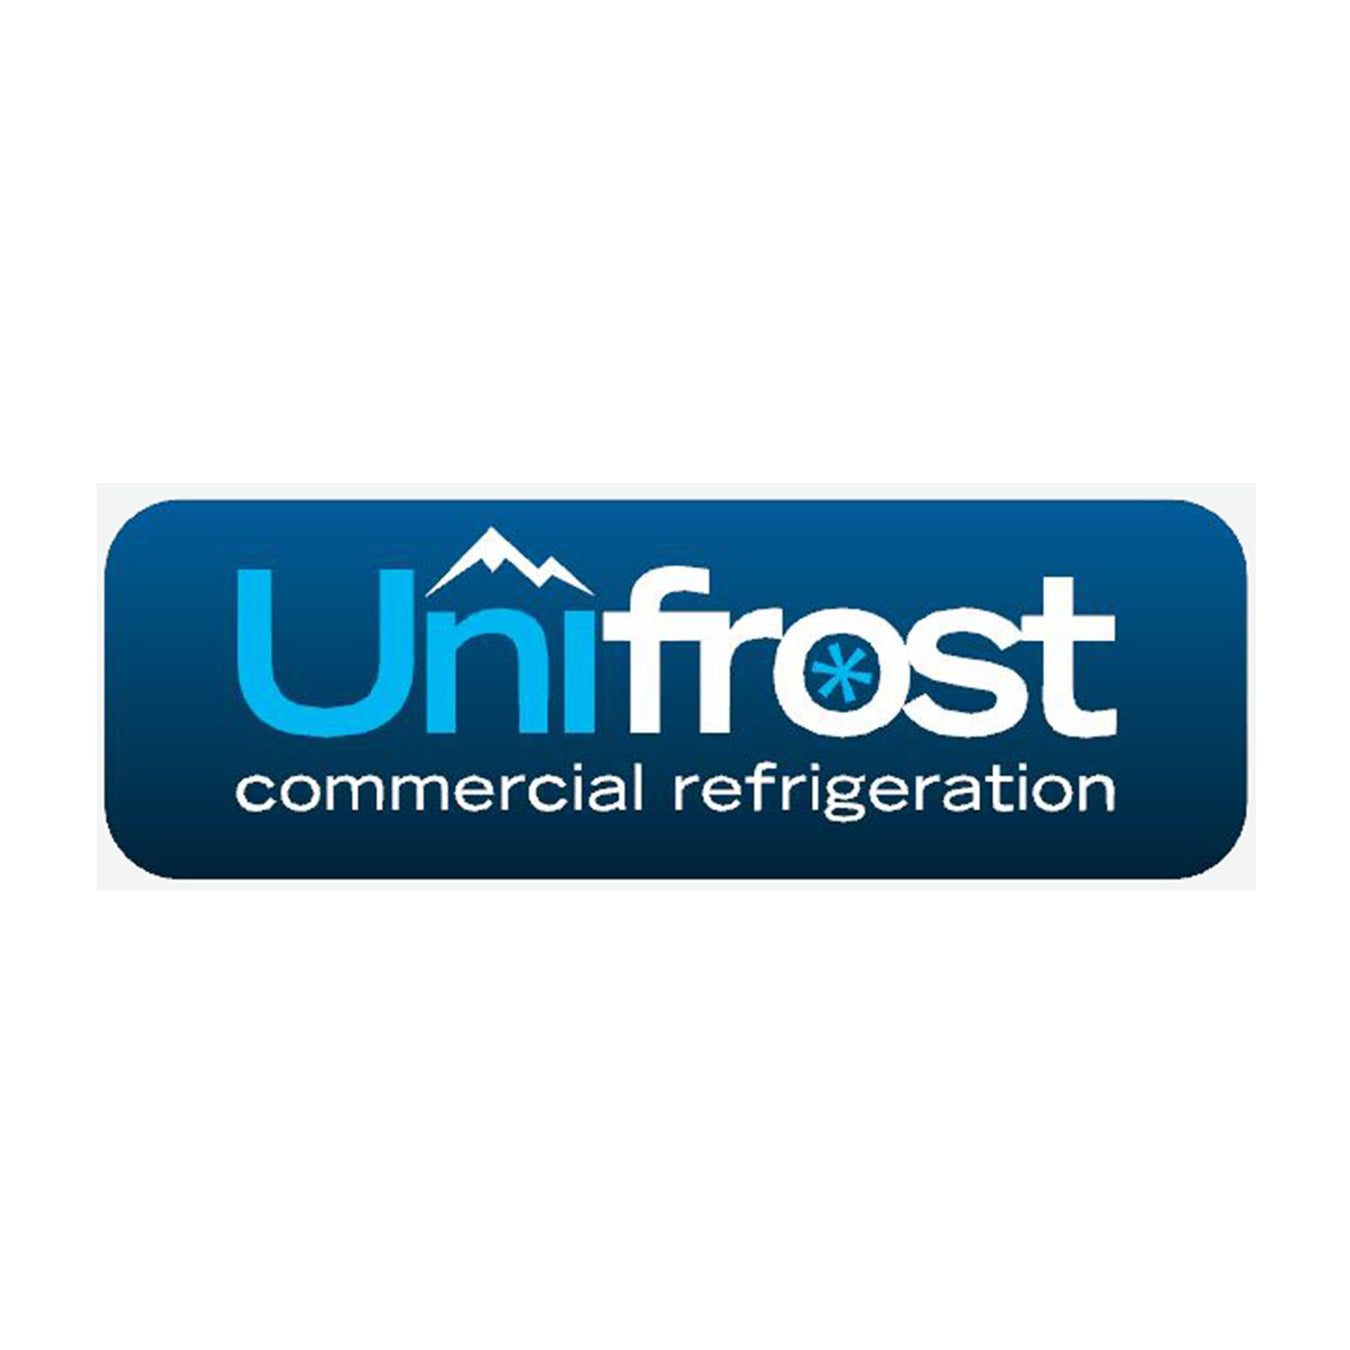 Unifrost - Gecko Catering Equipment